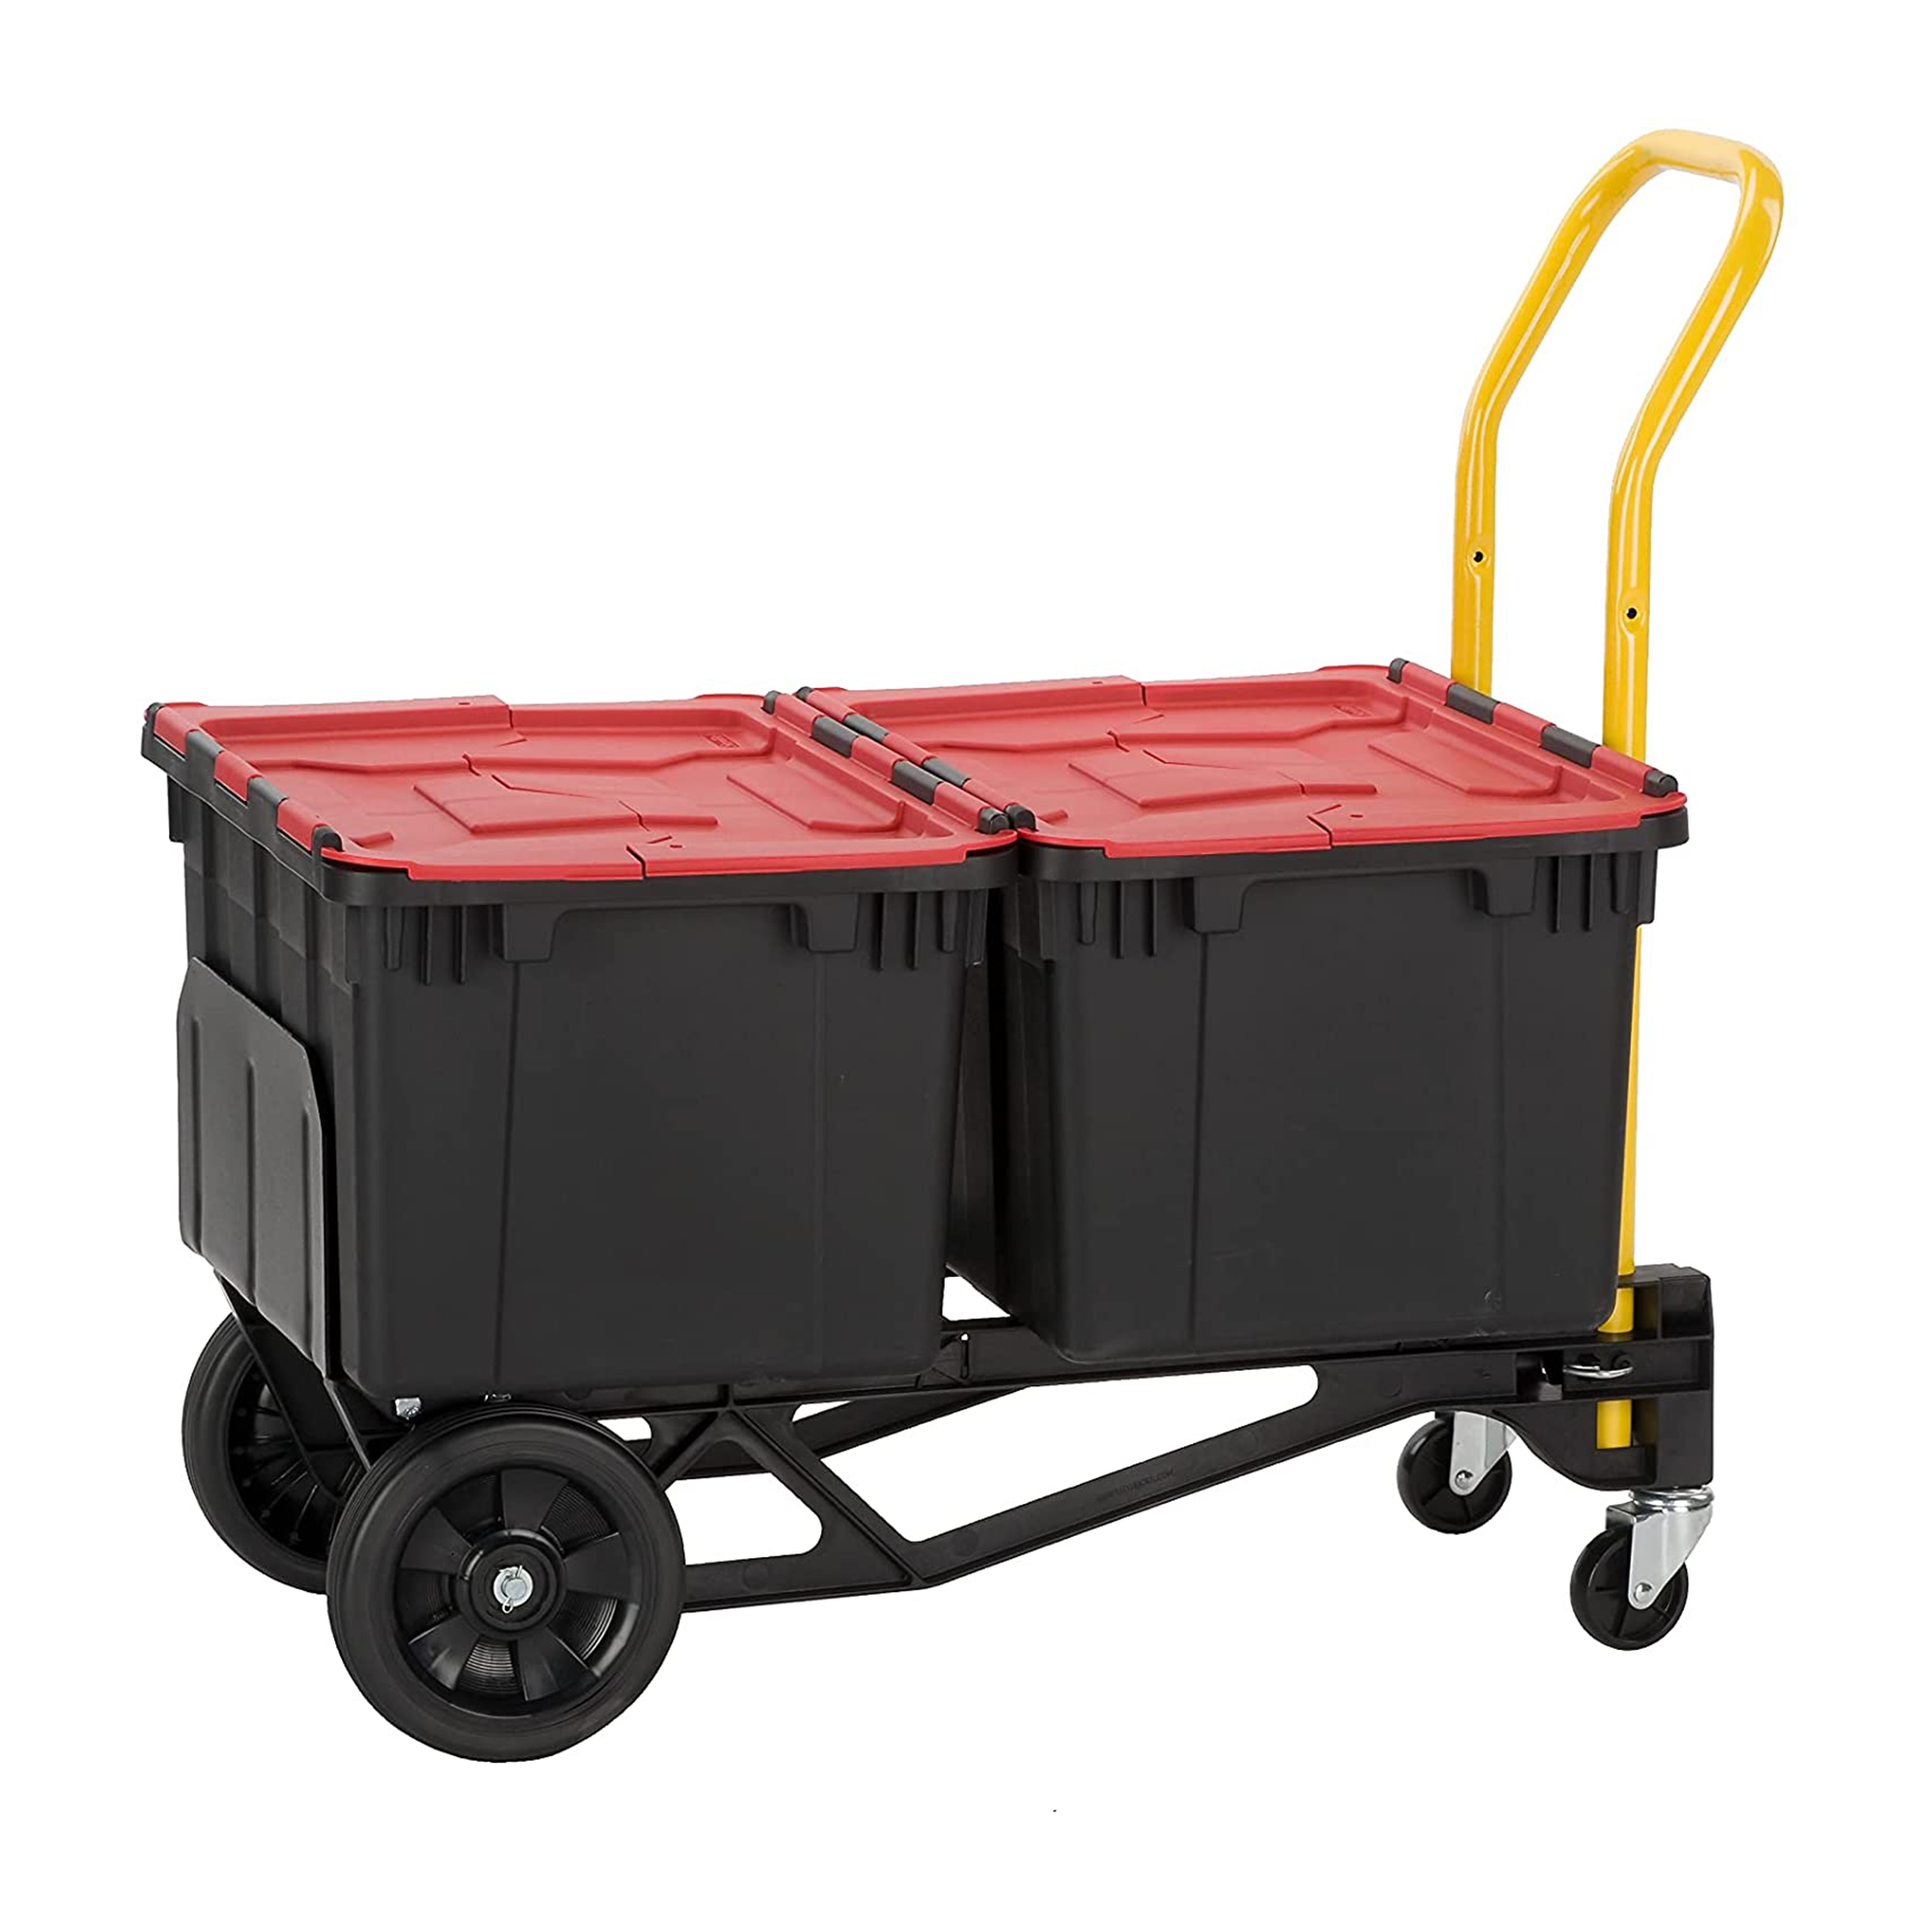 Harper Trucks PJDY2223AKD Hand Truck and Dolly, 400 Lb Capacity, Black - image 3 of 5